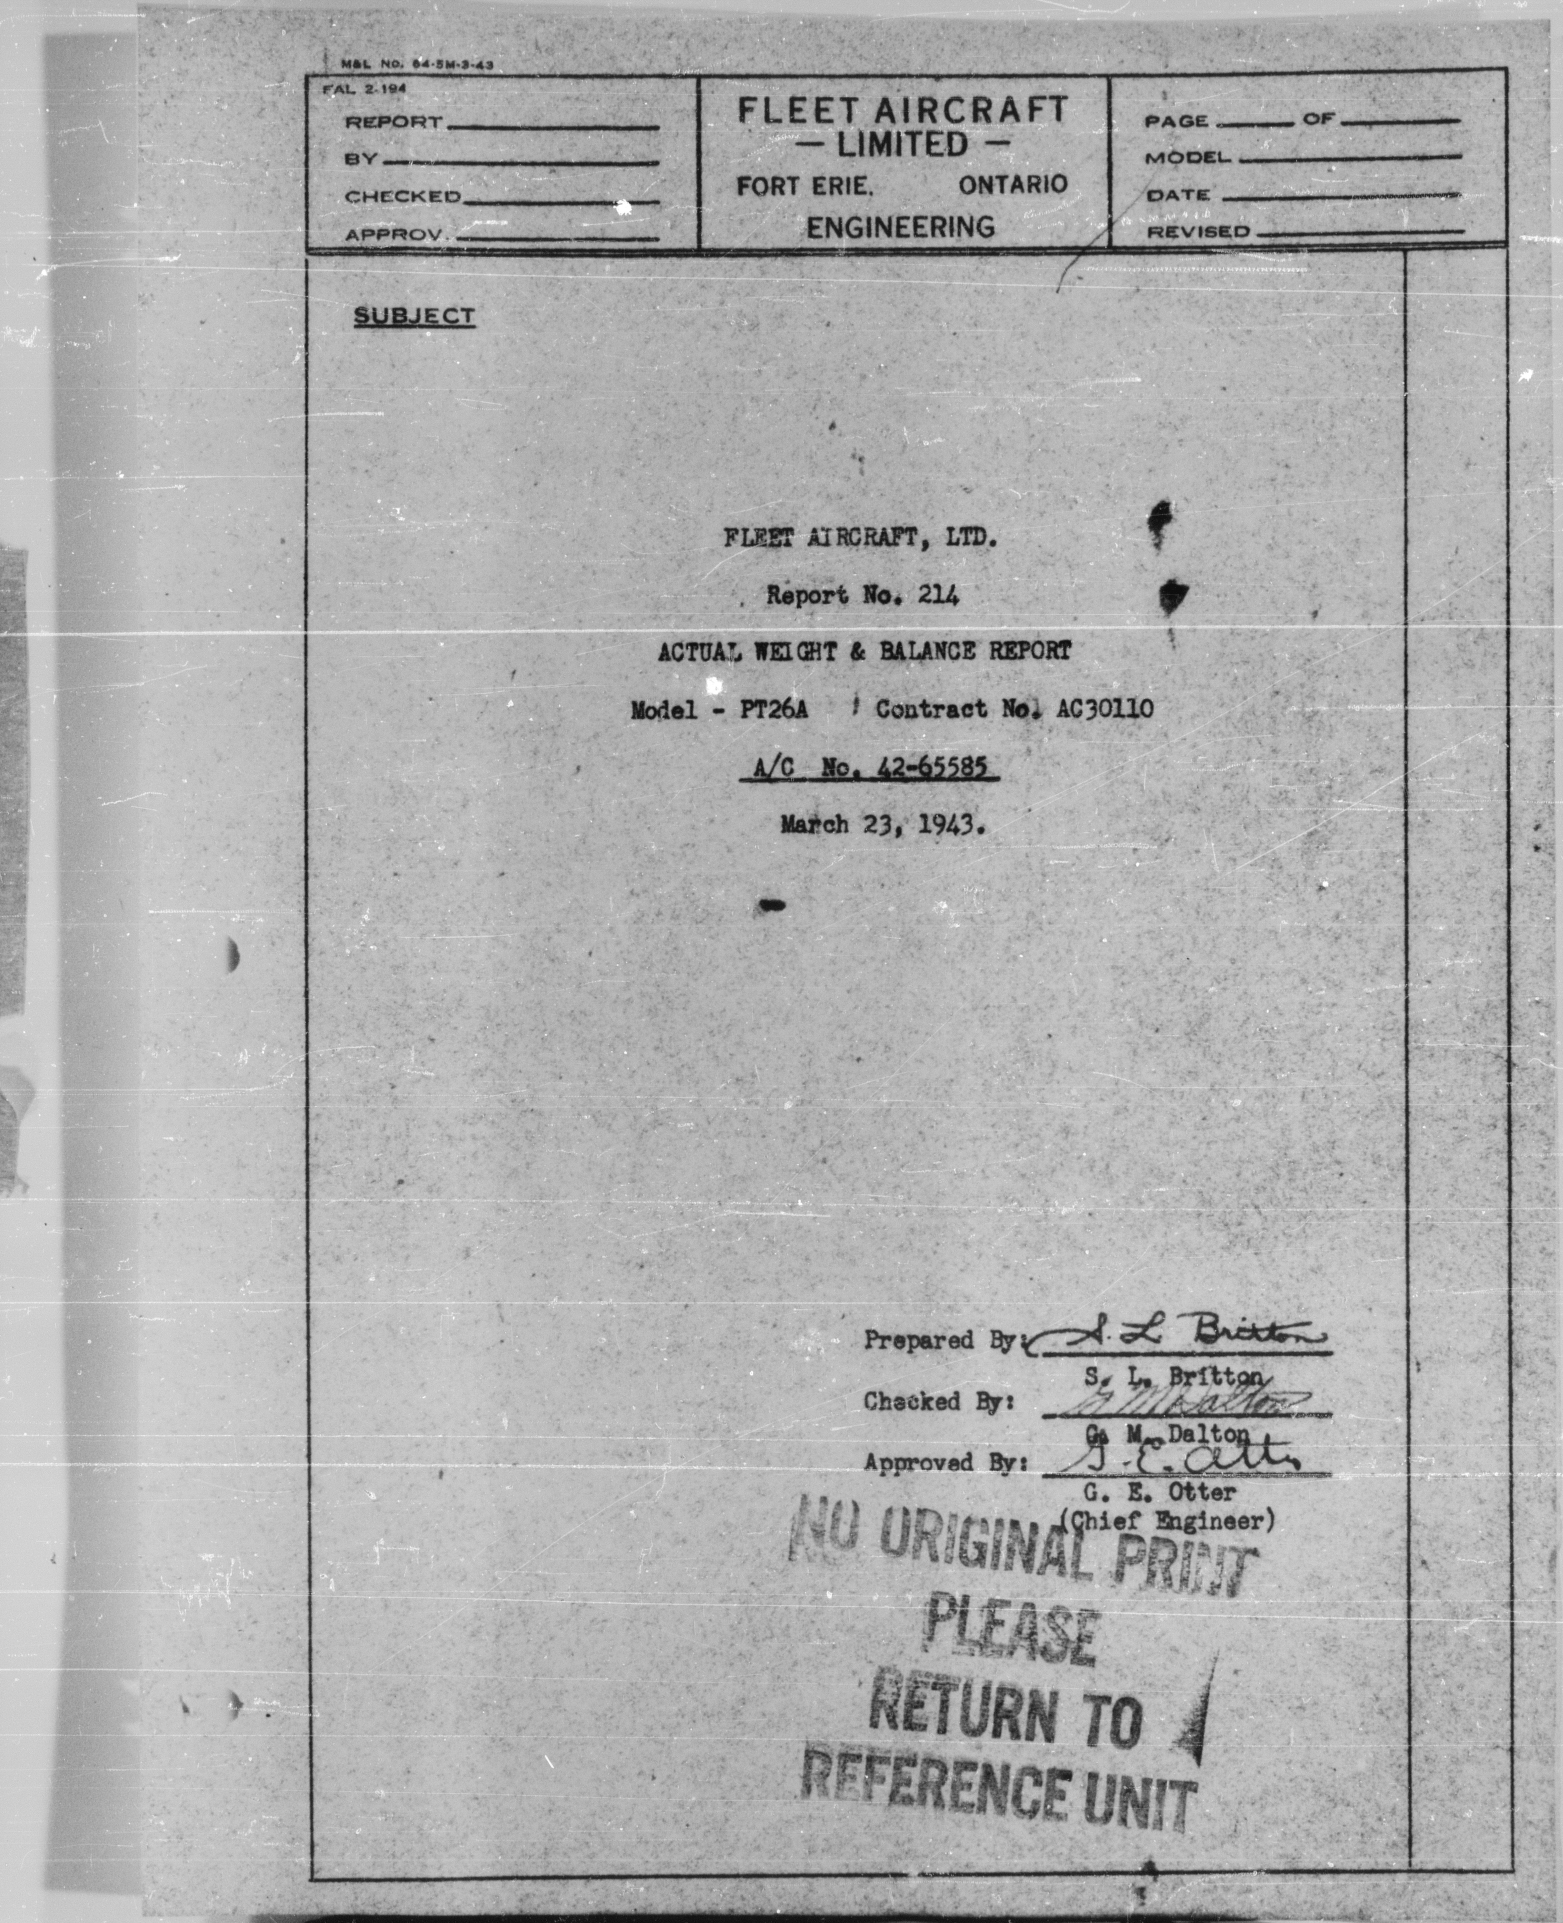 Sample page 1 from AirCorps Library document: Actual Weight and Balance Report for Model PT-26A